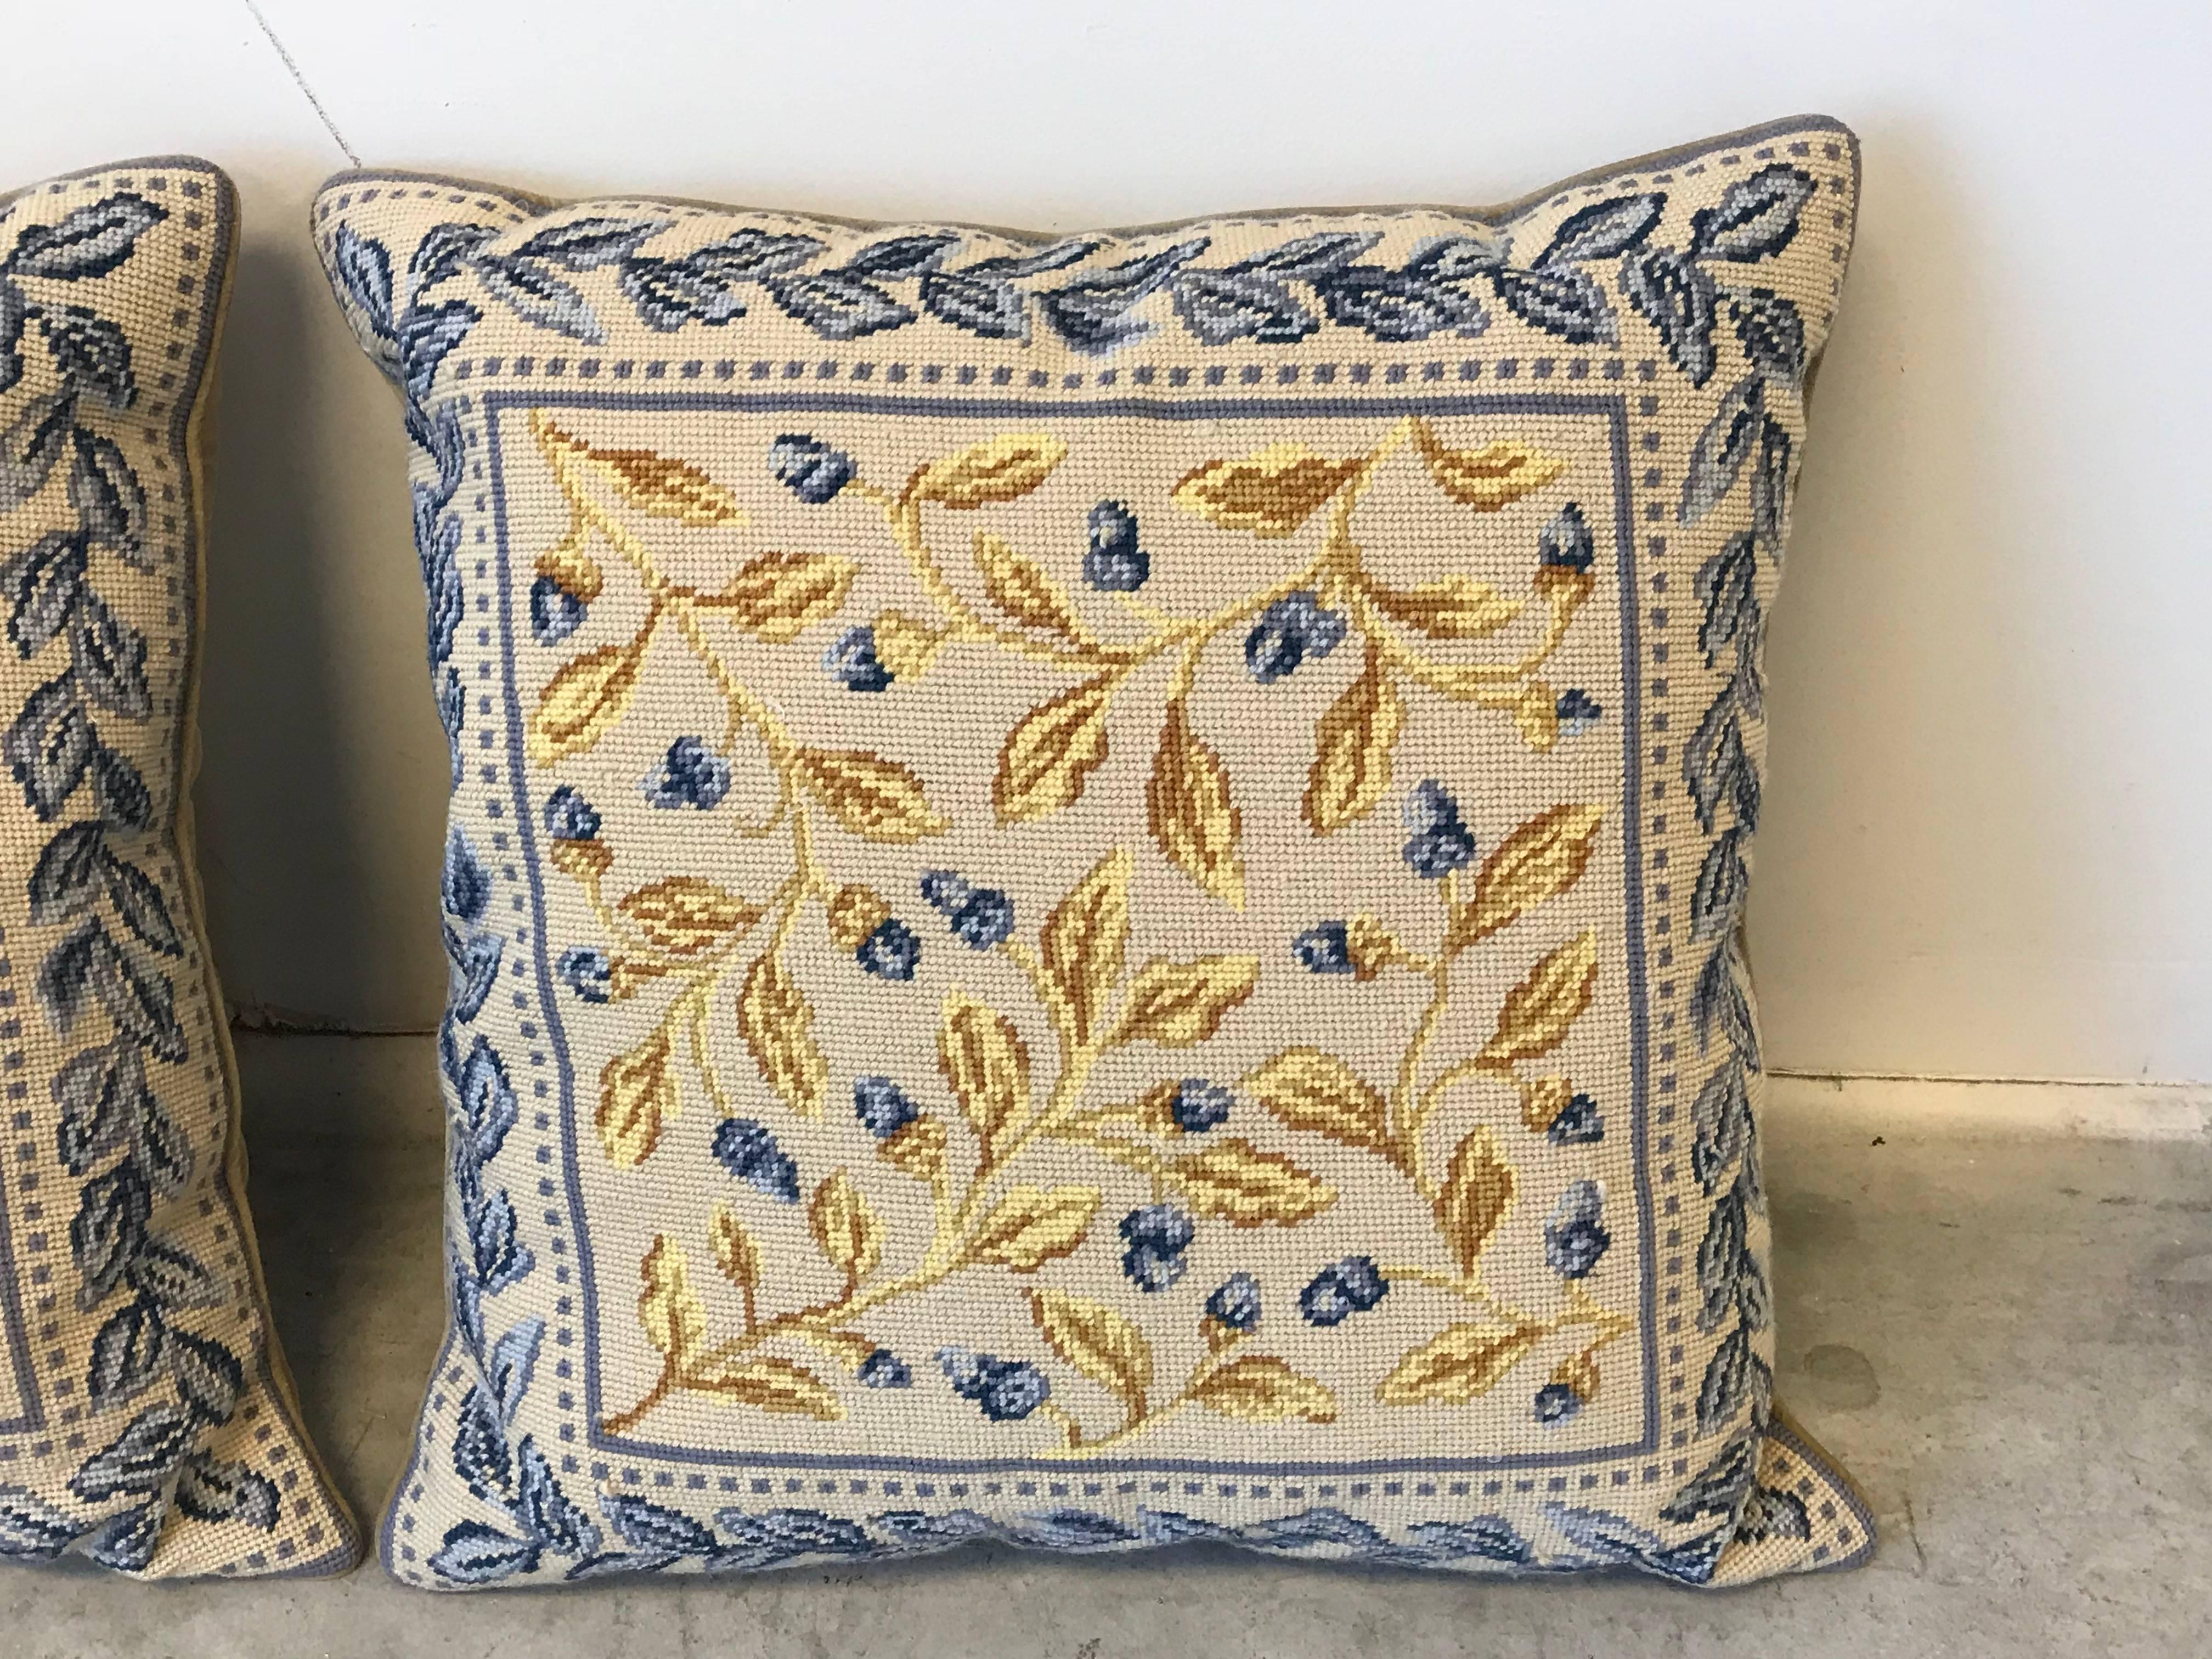 1970s Large Floral Motif Needlepoint Pillows, Pair In Good Condition For Sale In Richmond, VA